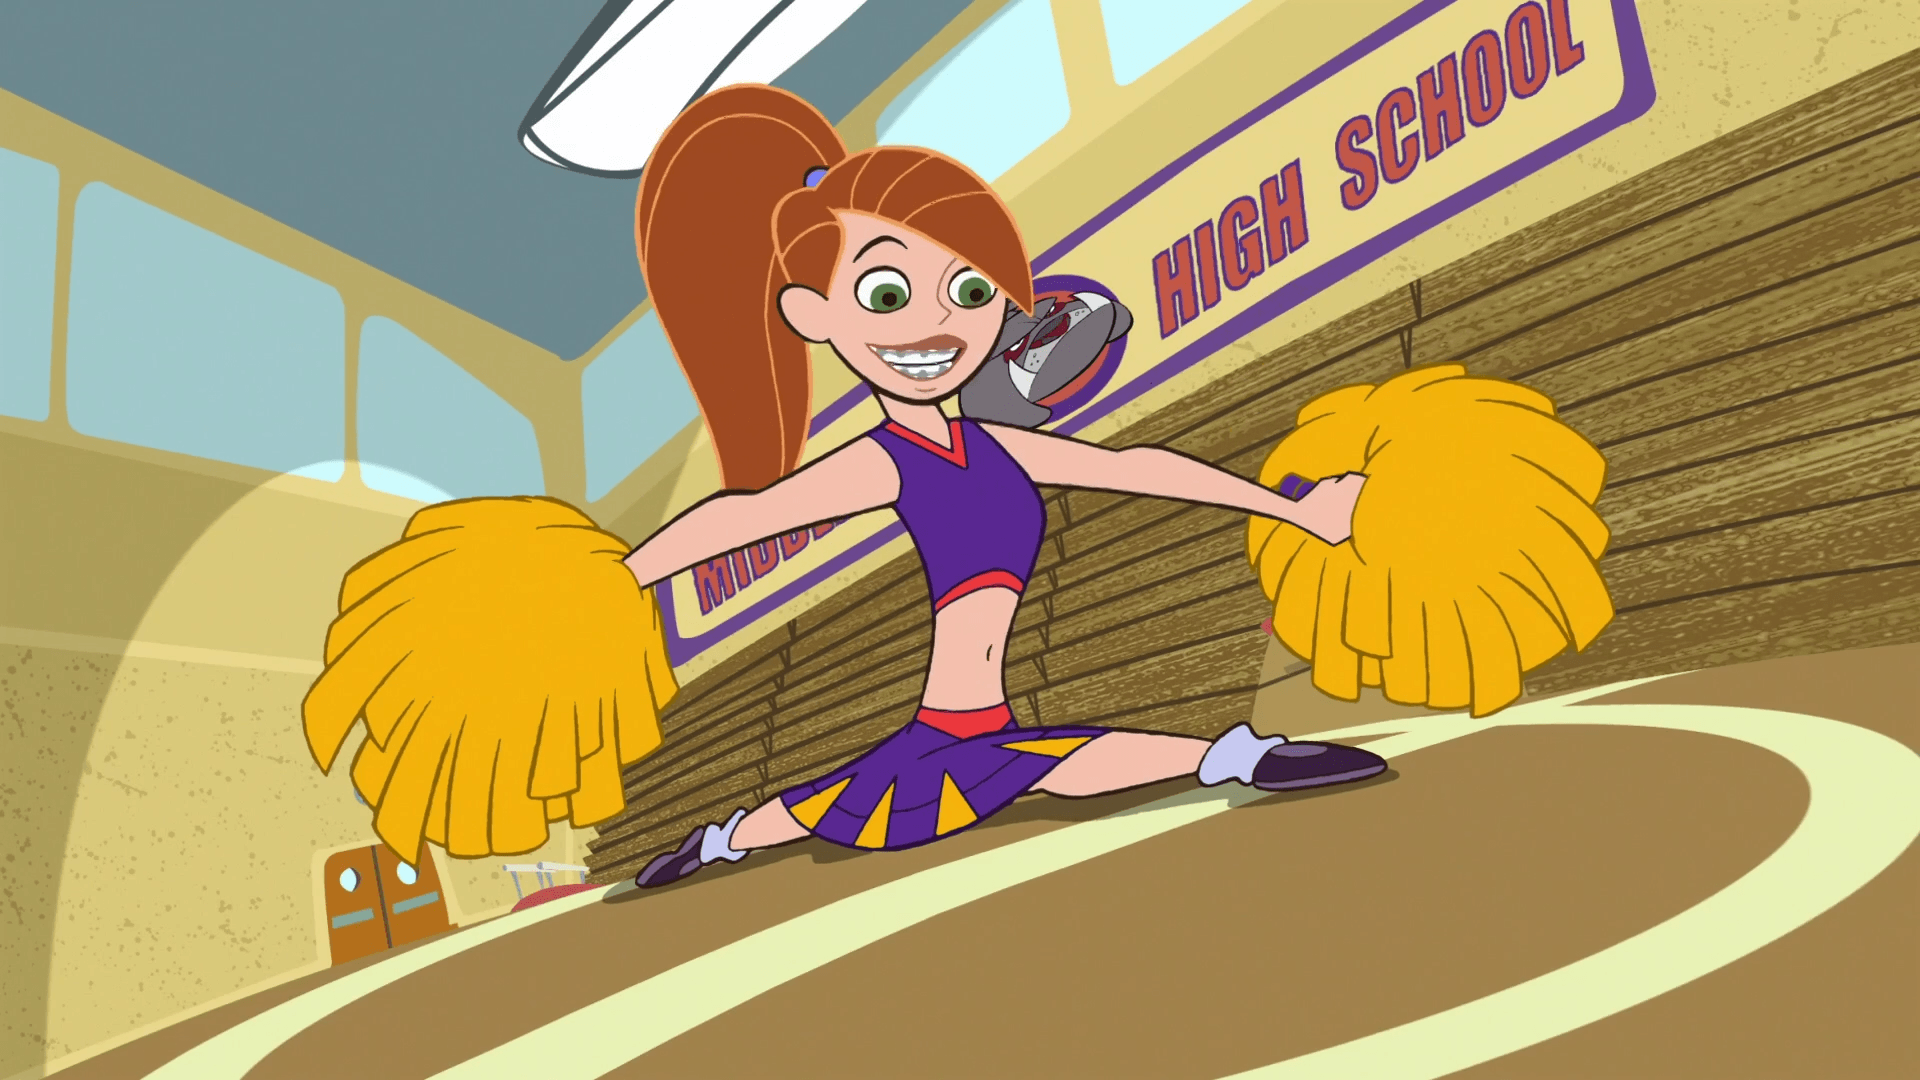 Kim Possible 2K Wallpapers